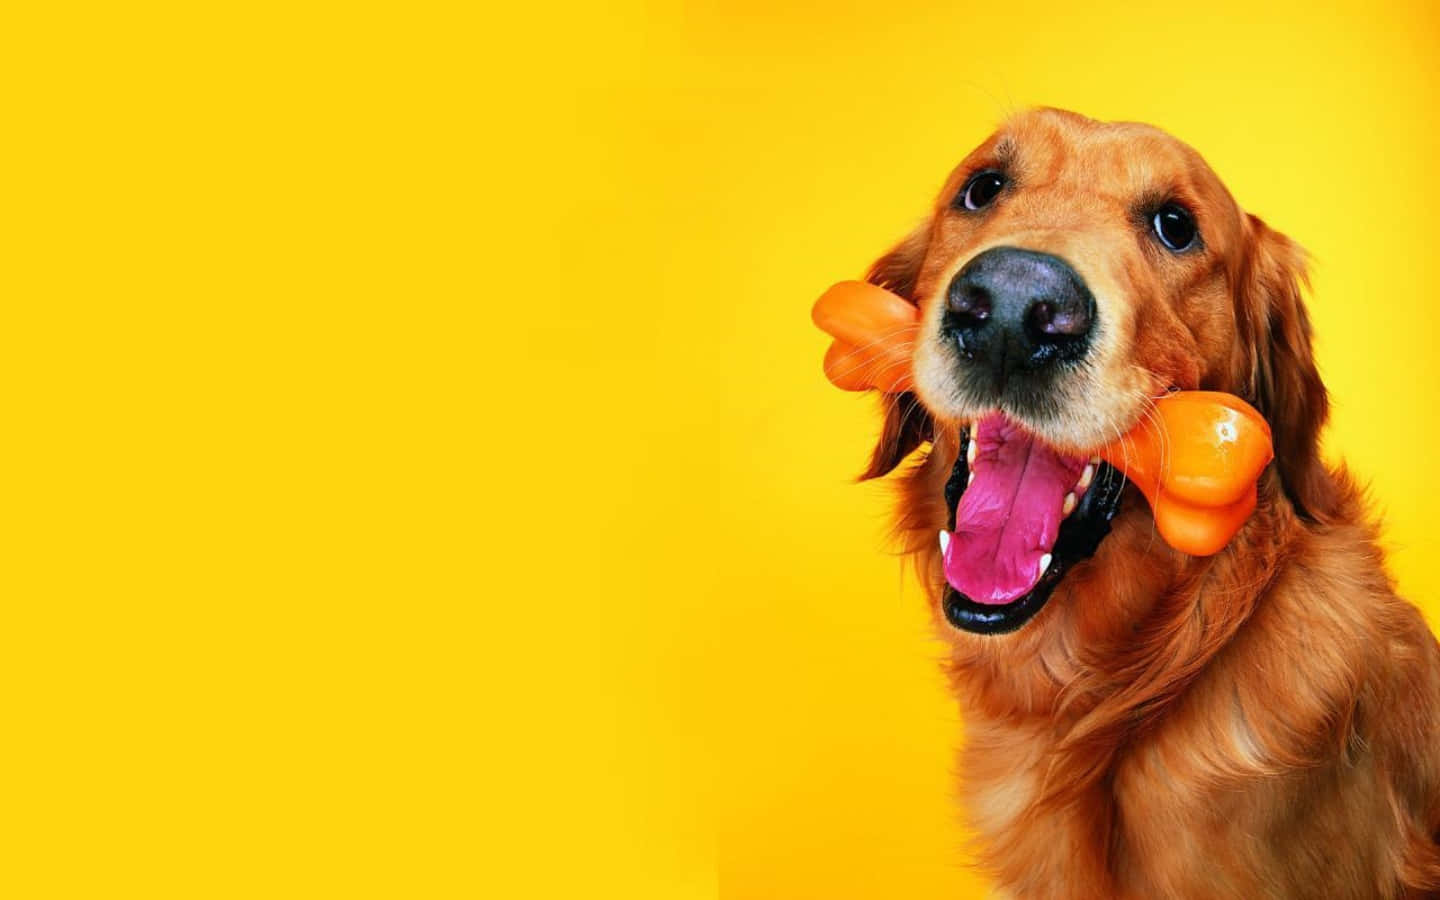 A Dog With A Bone In Its Mouth Wallpaper